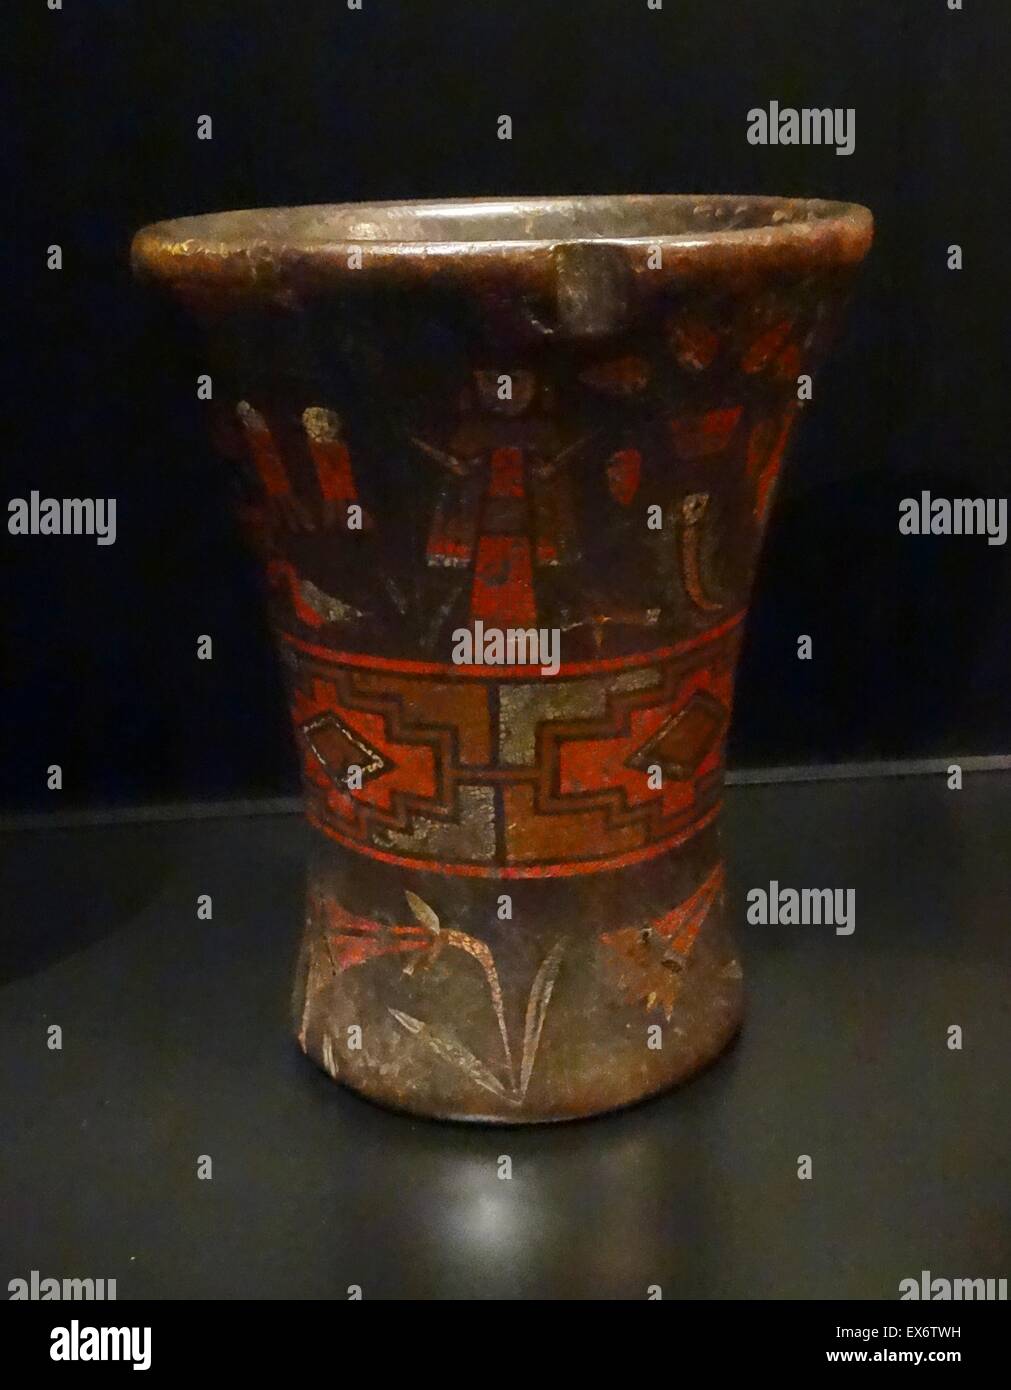 Peruvian, Spanish Colonial-Inca culture, ceremonial goblet; (kero) wood with encrusted resins 18th century. Stock Photo